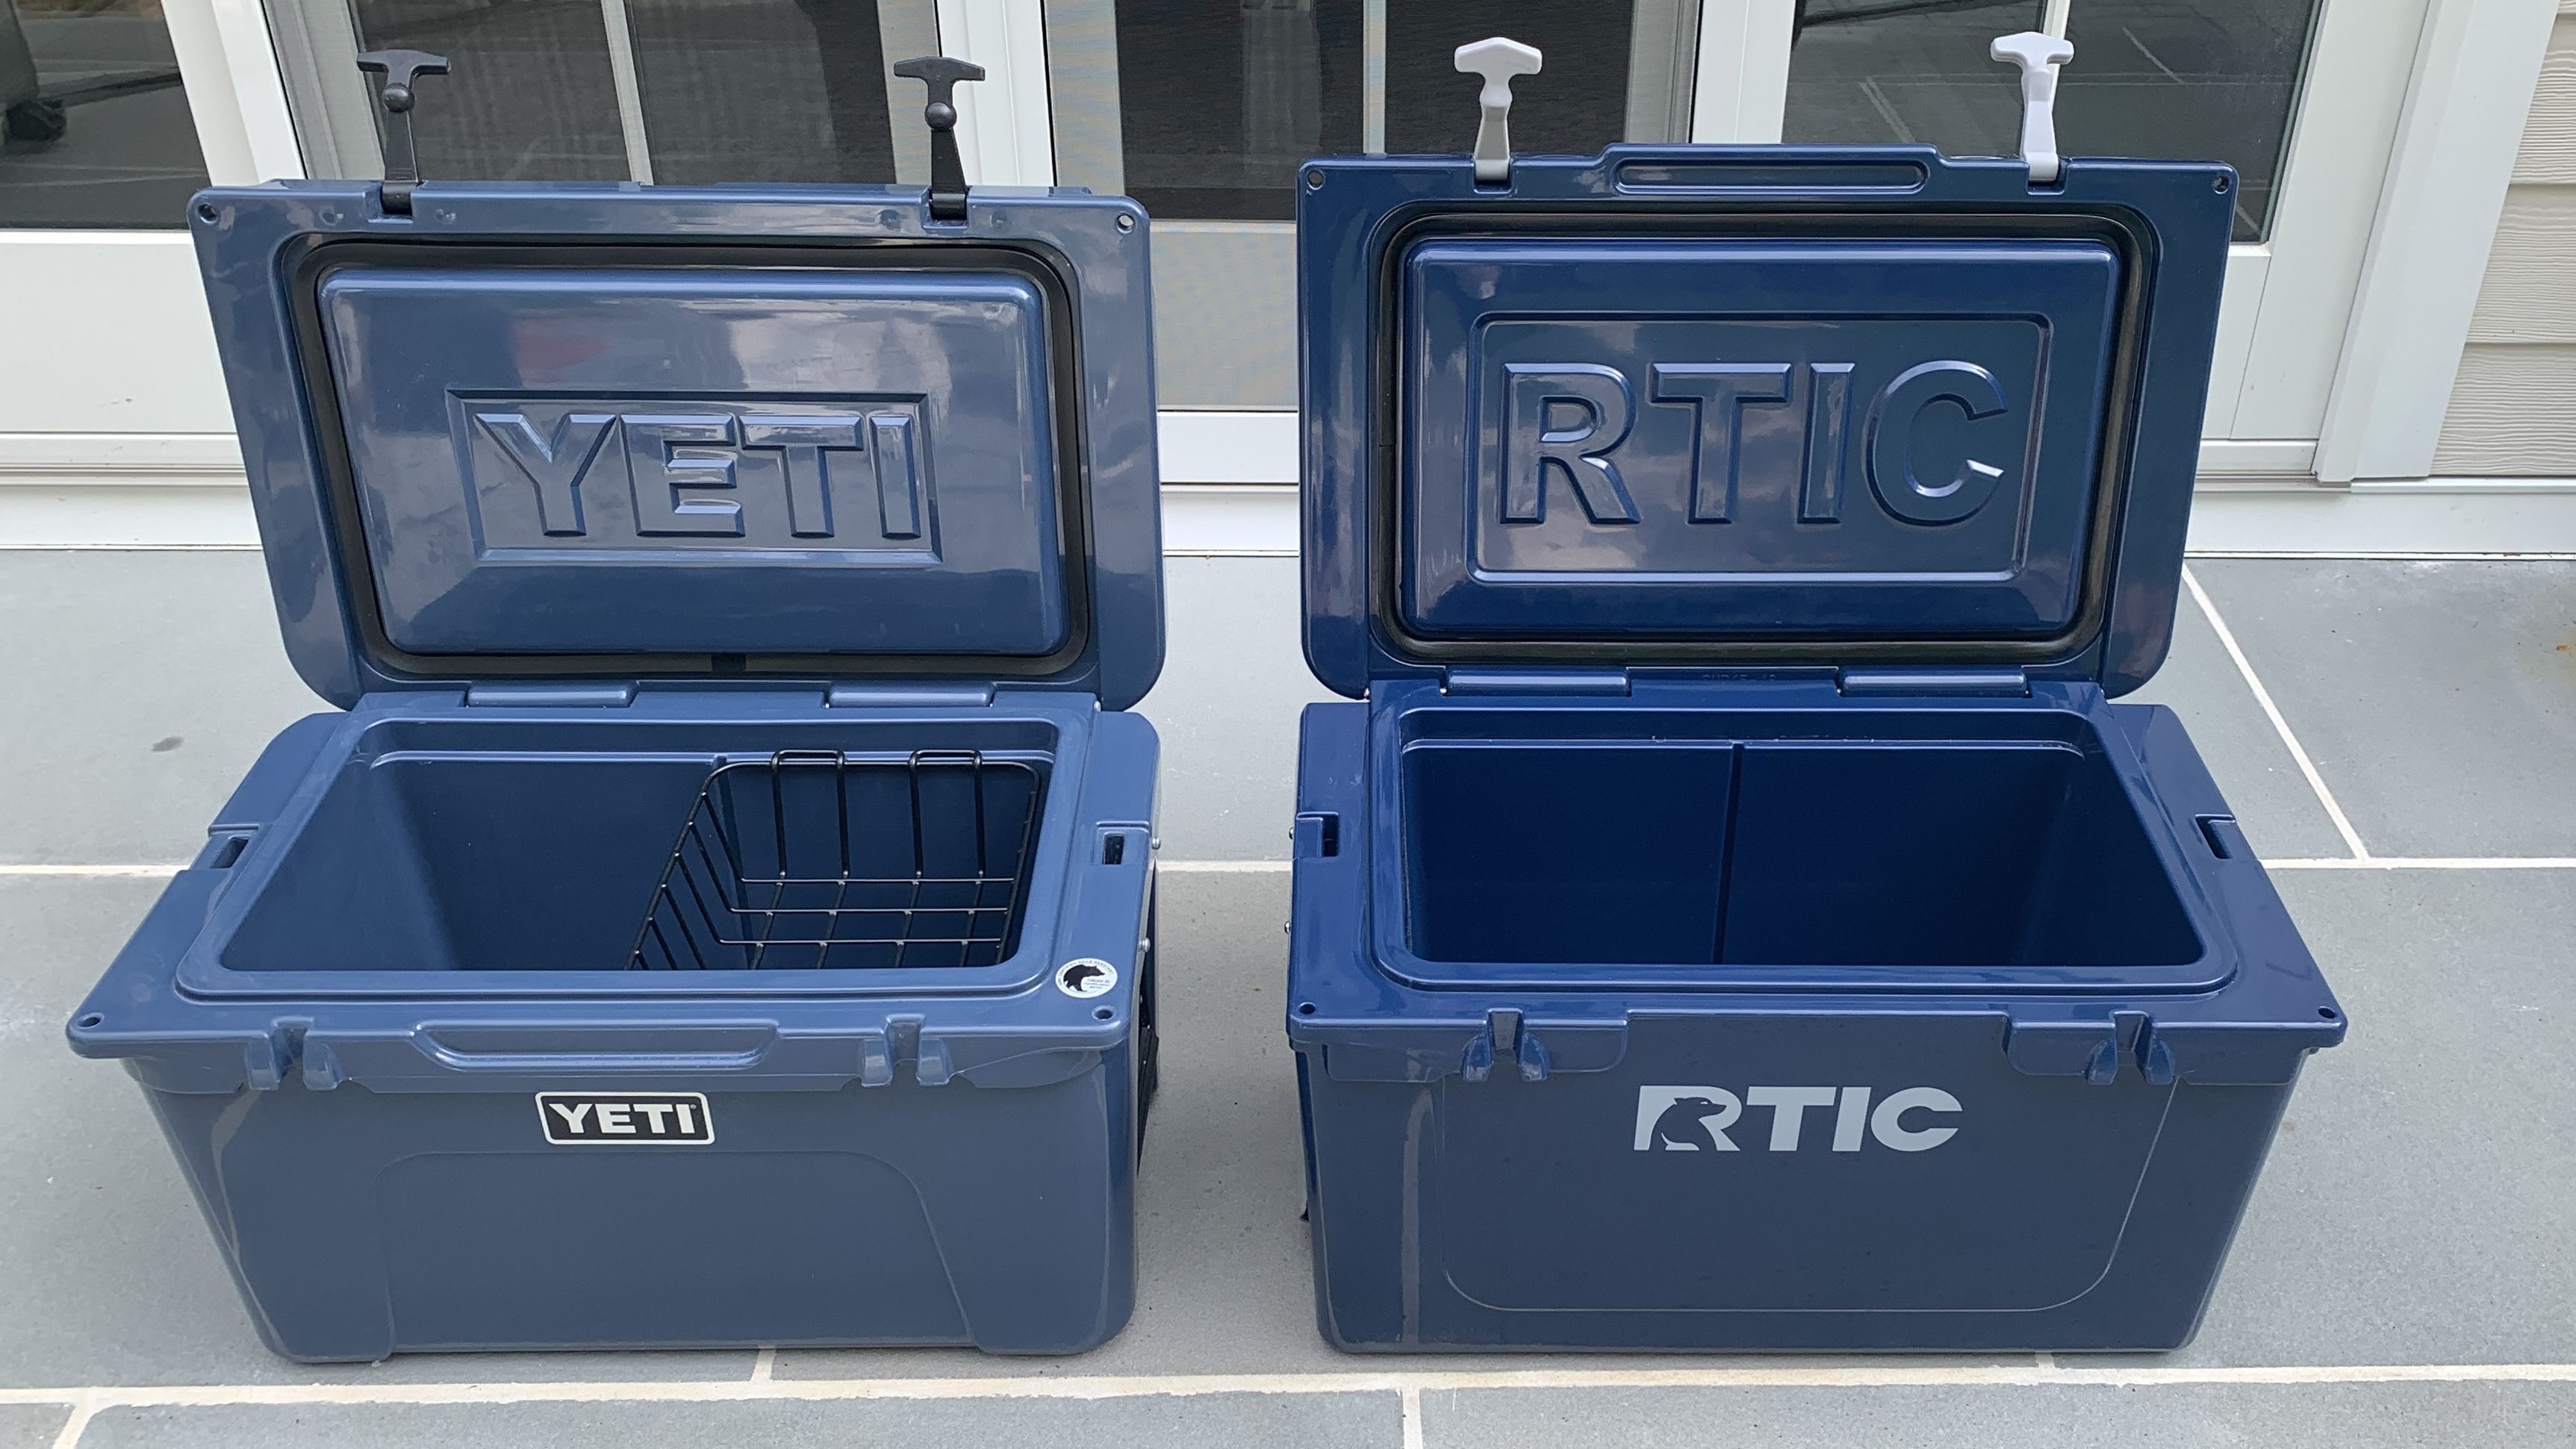 Yeti Tundra 45 Cooler review: It wasn't close. Yeti's cooler crushed the  competition - CNET